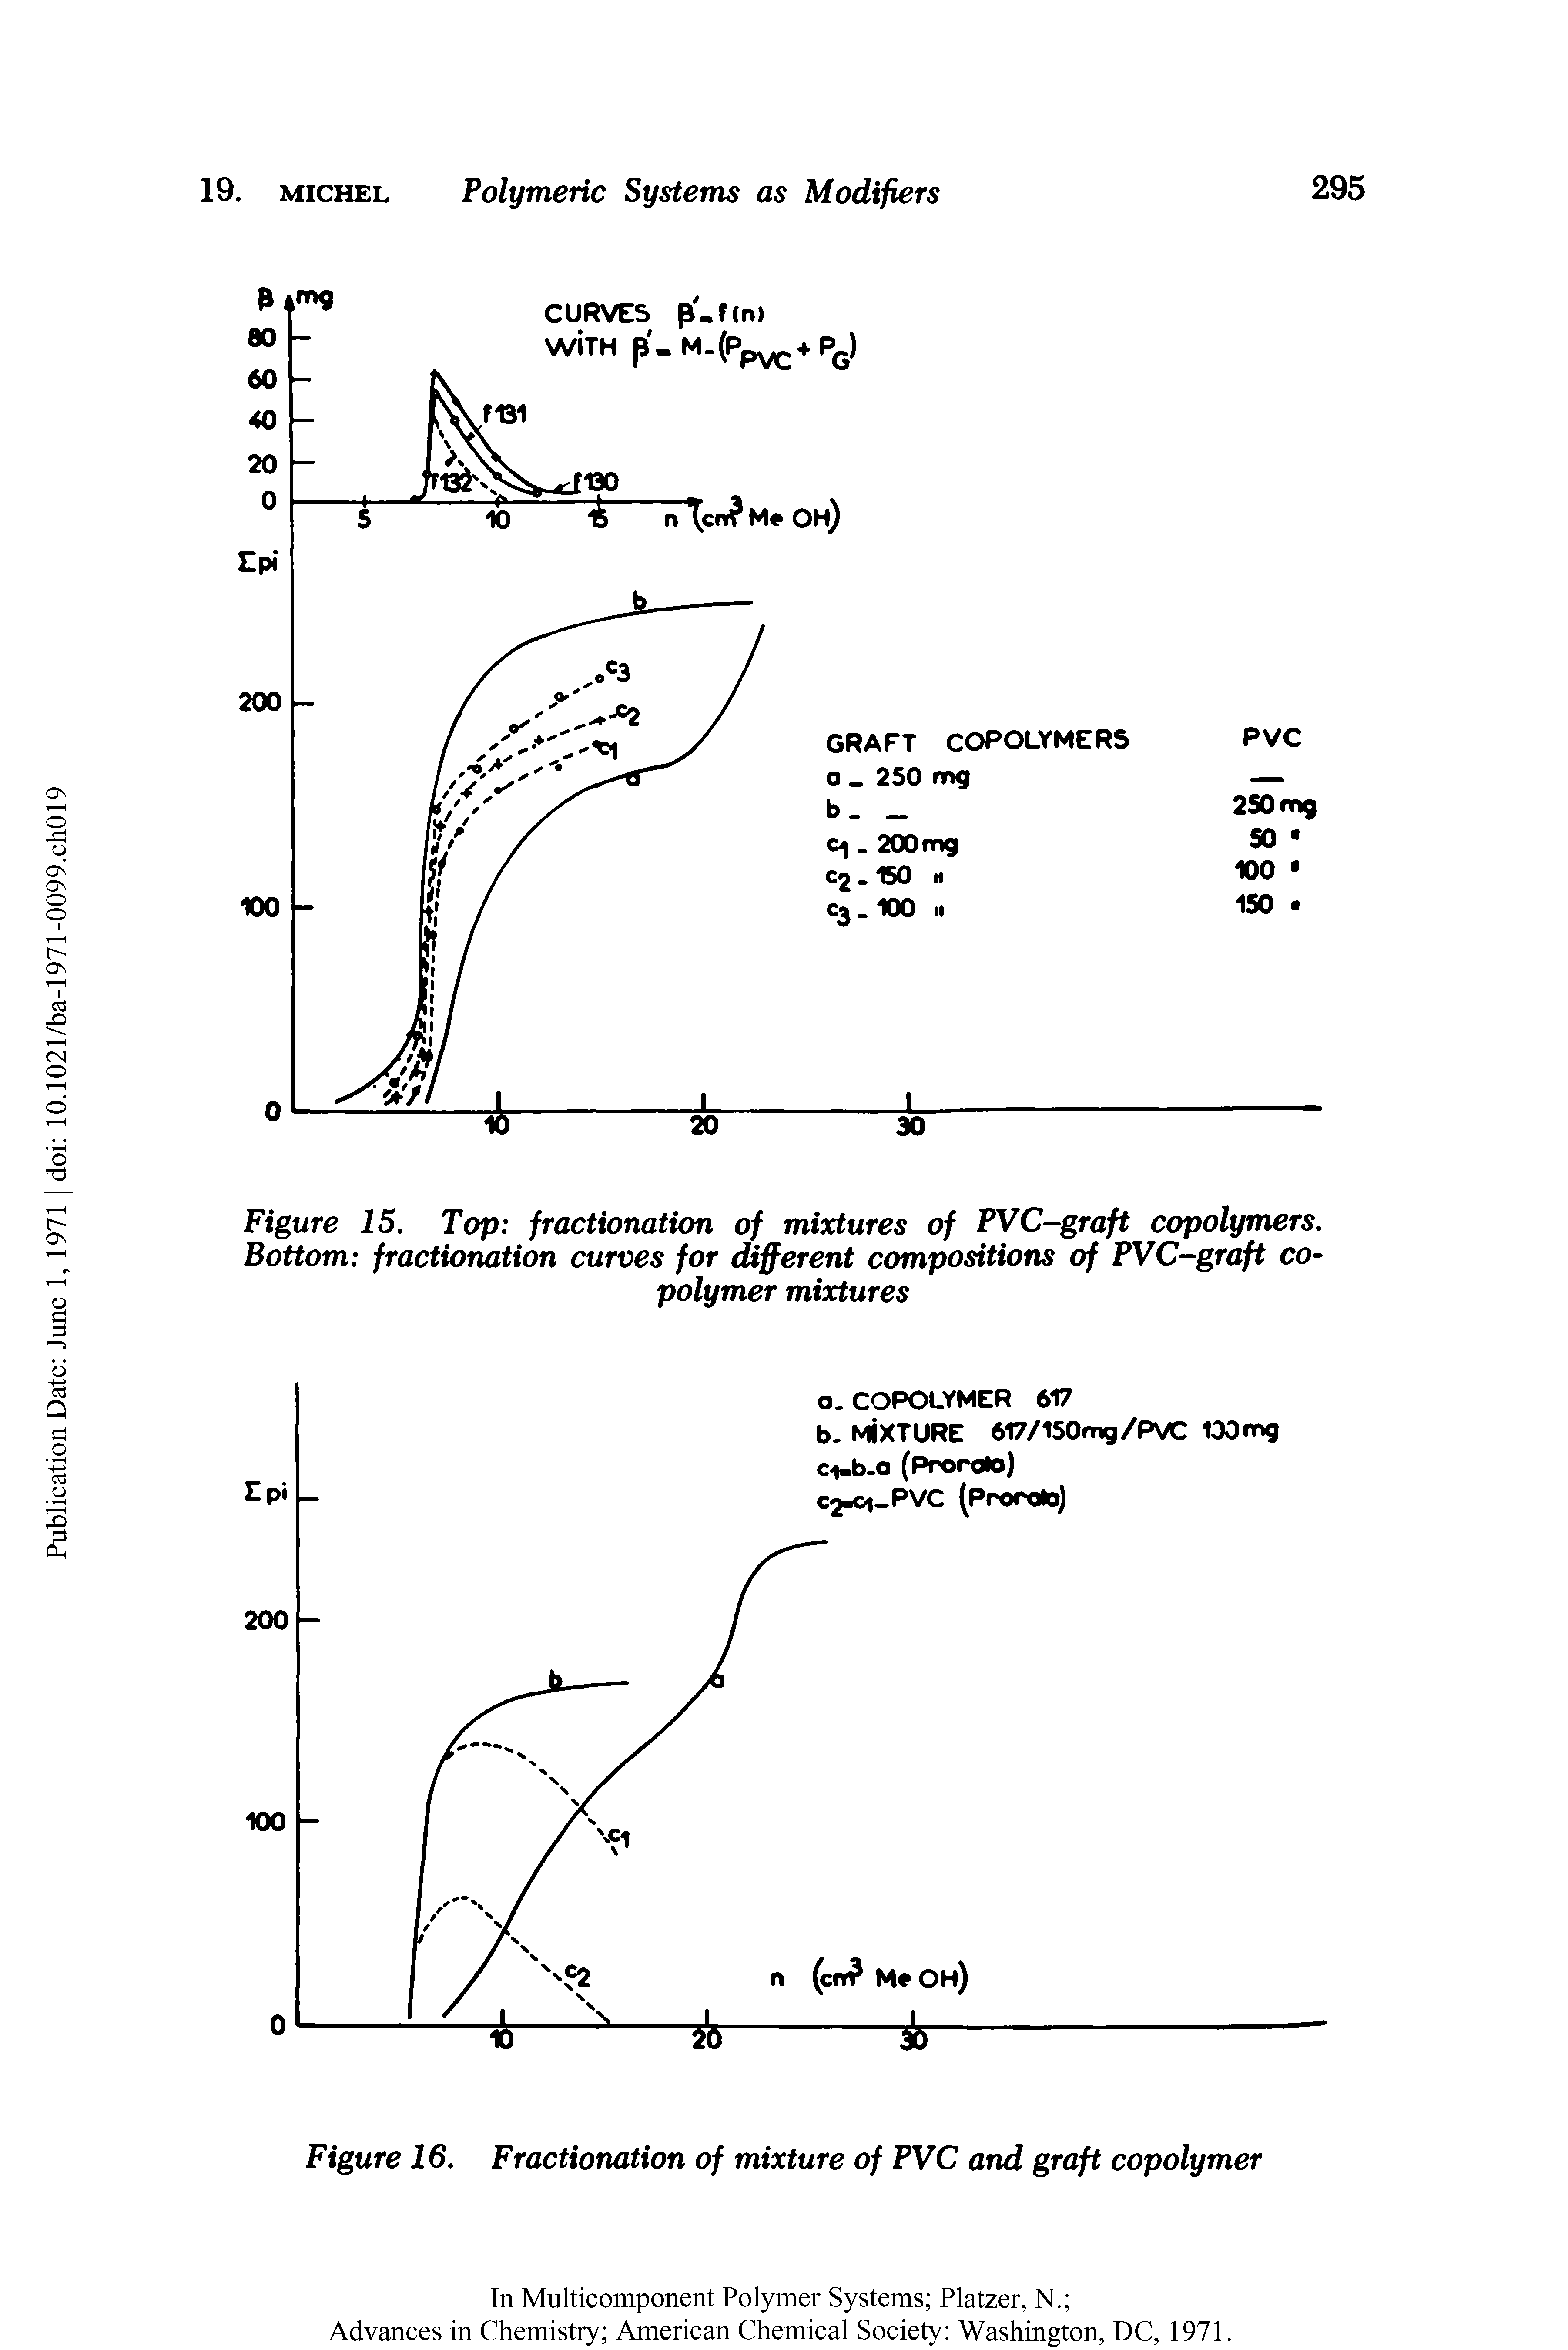 Figure 15. Top fractionation of mixtures of PVC-graft copolymers. Bottom fractionation curves for different compositions of PVC-graft copolymer mixtures...